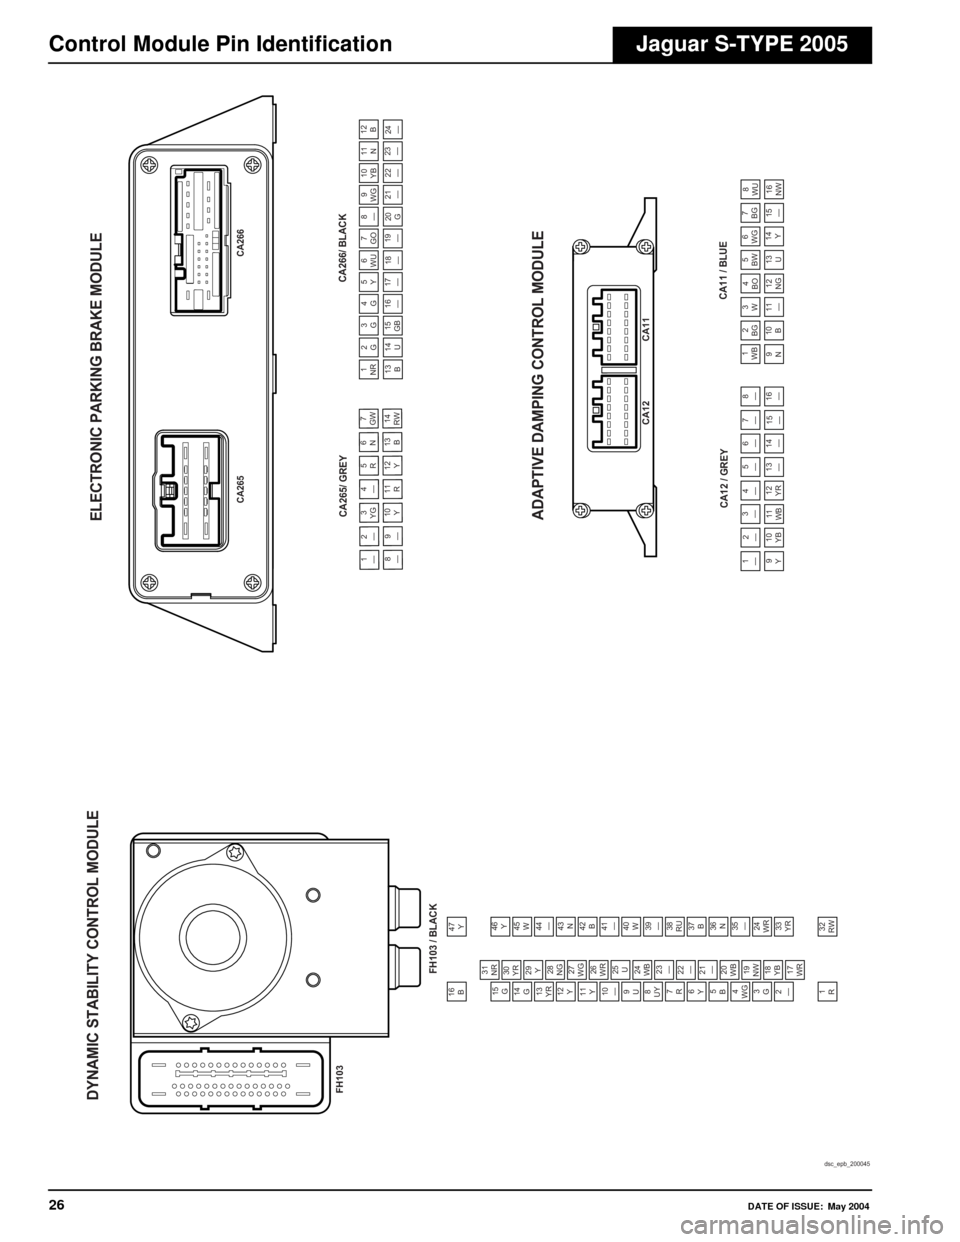 JAGUAR S TYPE 2005 1.G Electrical Manual 
26DATE OF ISSUE: May 2004
Control Module Pin IdentificationJaguar S-TYPE 2005
FH103
CA265/ GREYCA265
CA266/ BLACK
CA266
1—
2—
3
YG 4
—
5
R 6
N 7
GW
8
—
9—
10 Y 11
R 12
Y 13
B 14
RW
1NR
2G
3